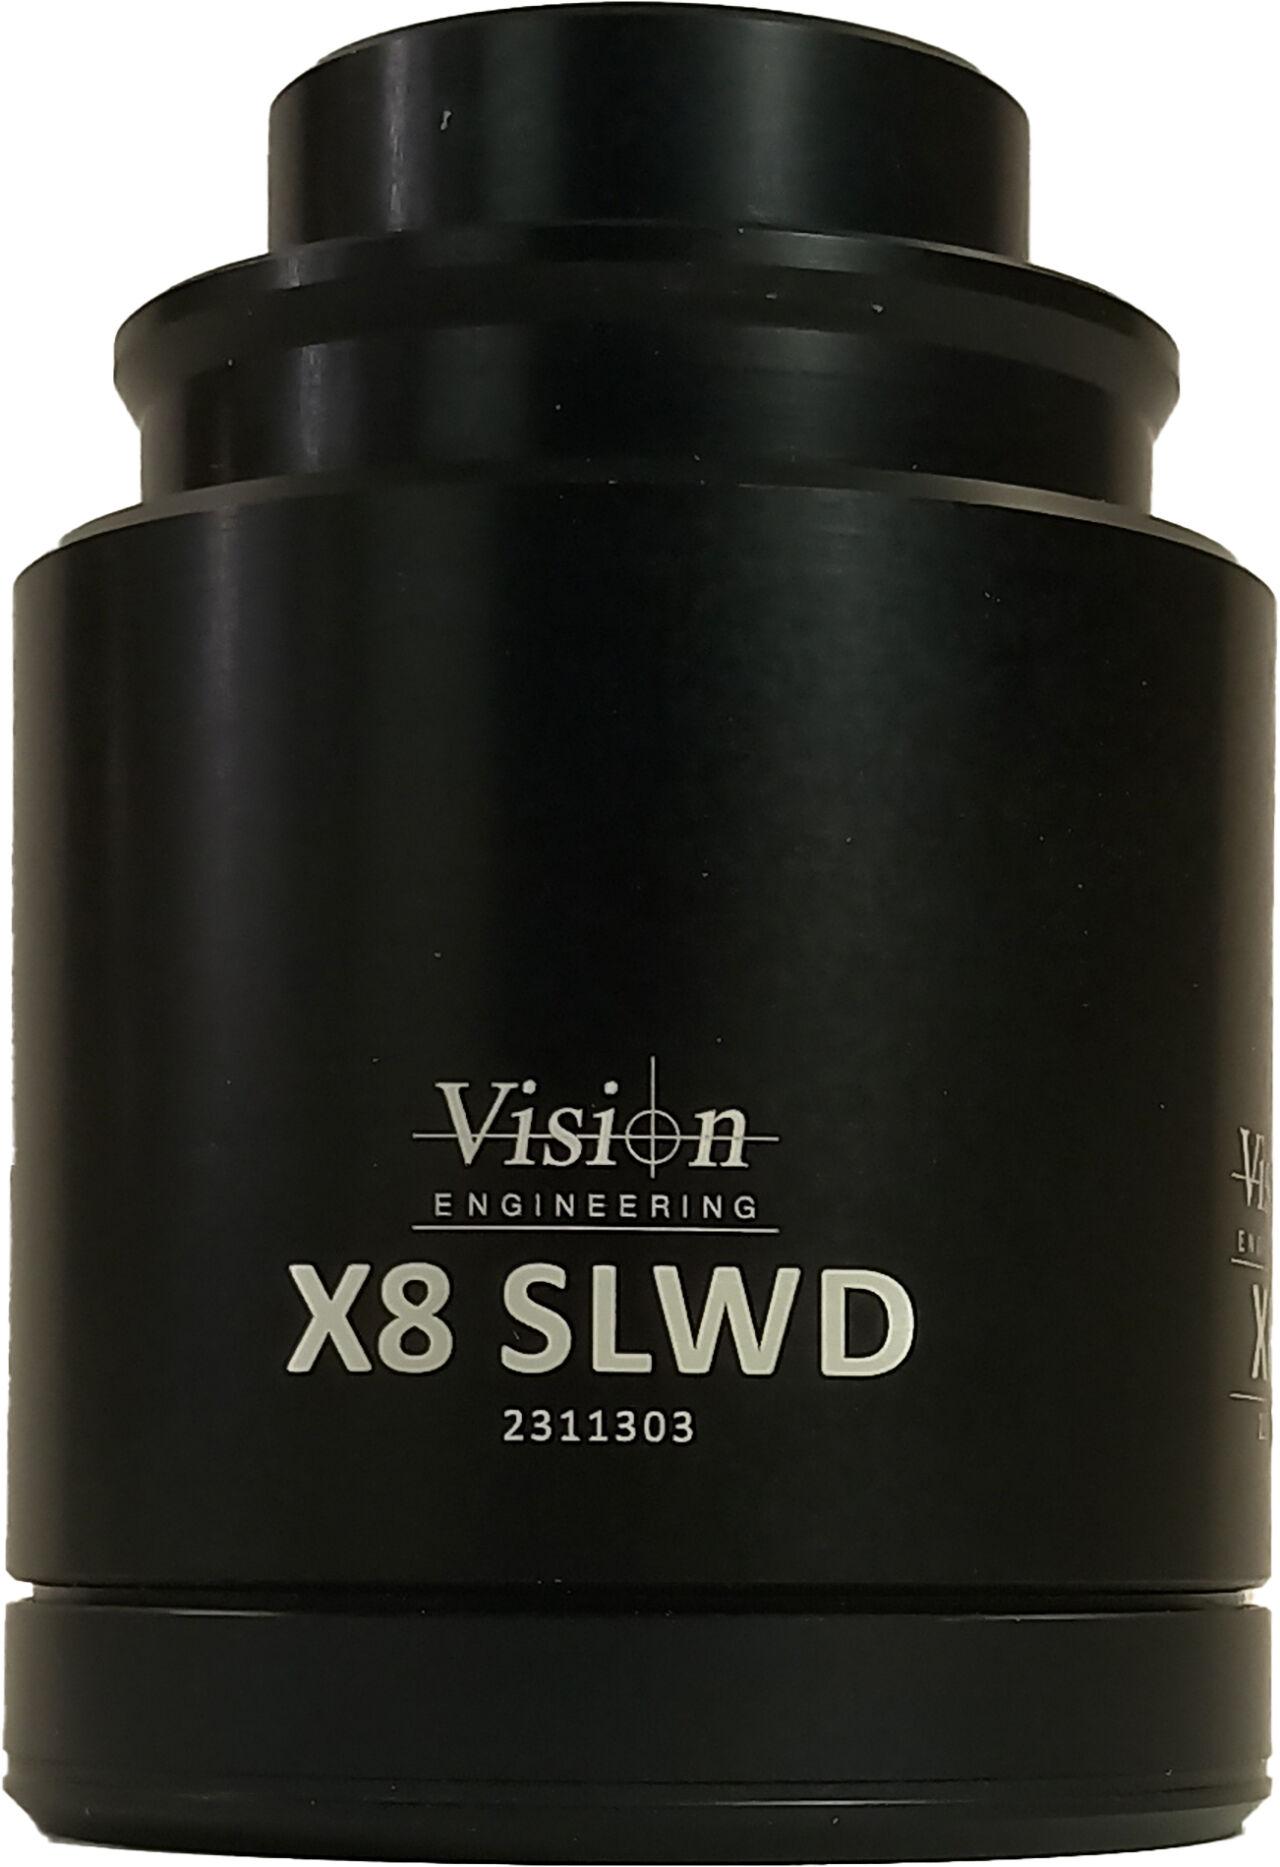 X8 SLWD Objective Lens - Working distance 113mm